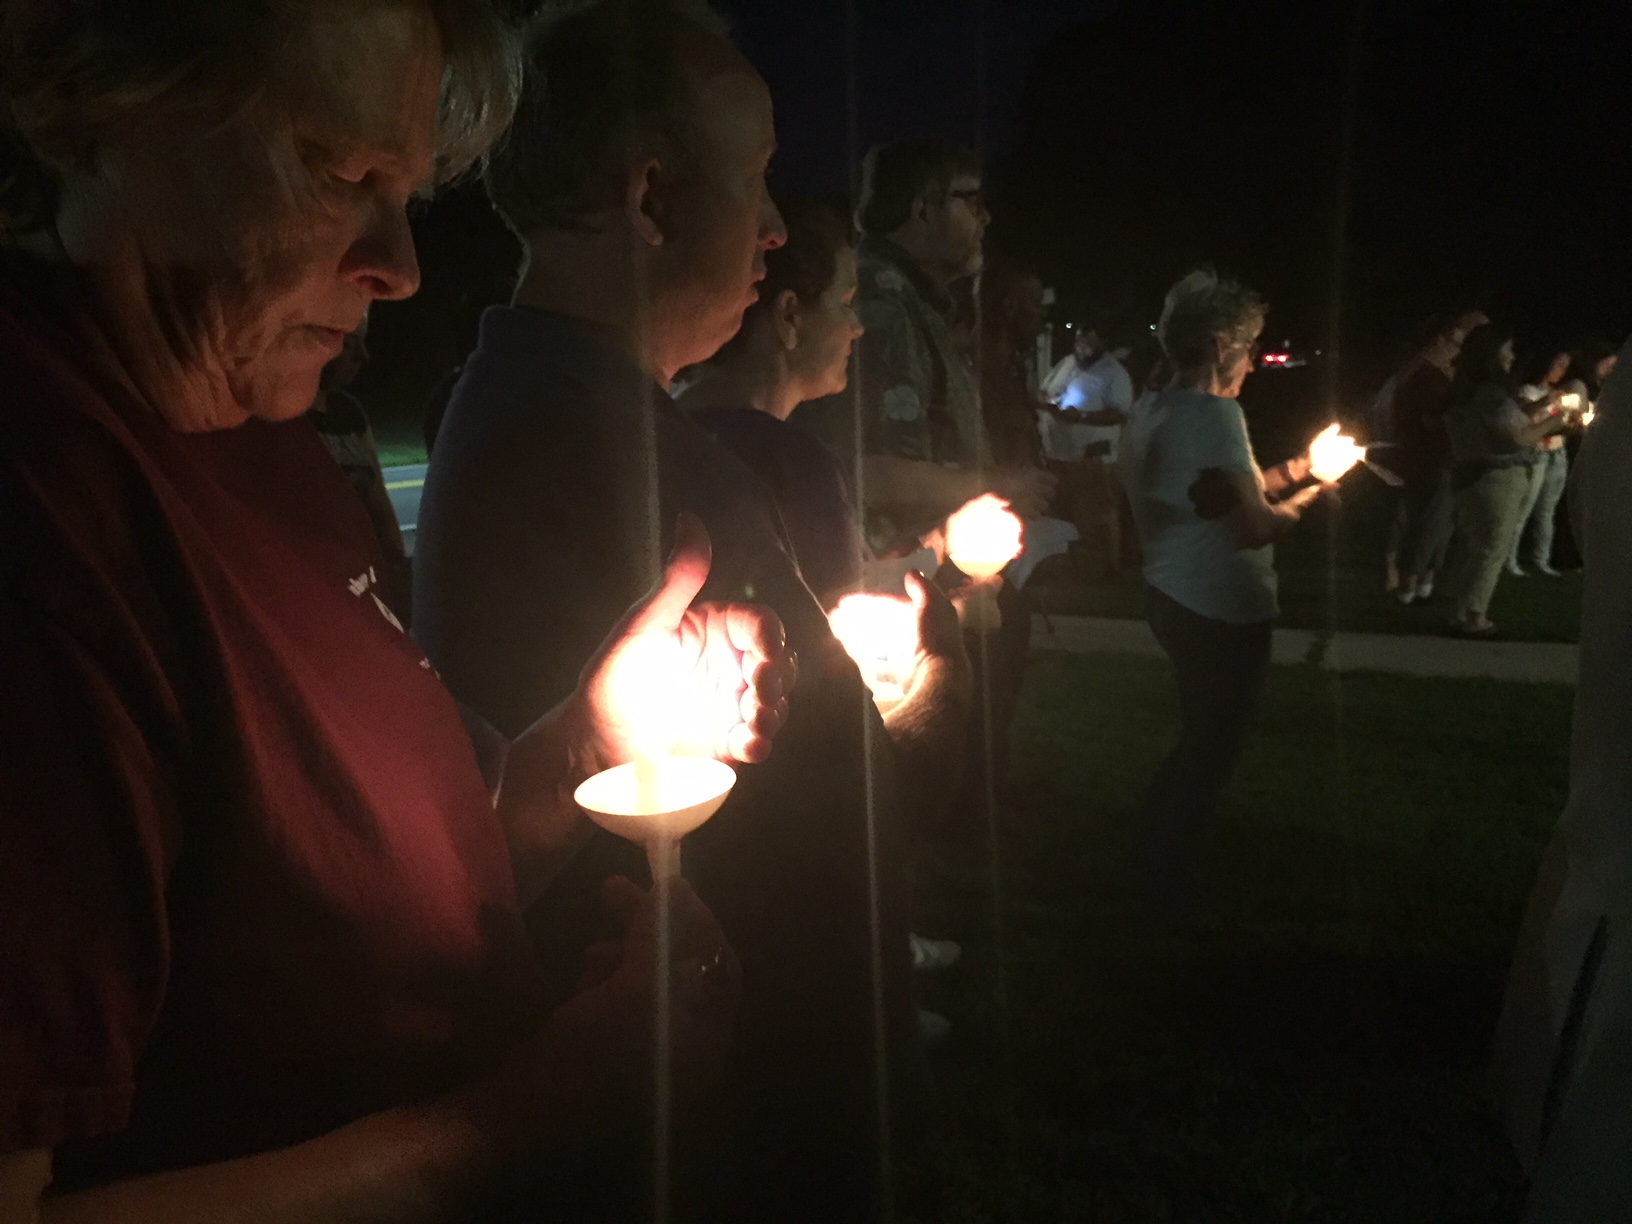 Members of the Perryman community participate in a candle-light prayer vigil at Cranberry UMC Sept. 21 following the mass shooting at the Rite Aid Distributoin Center one mile away. Photo by Erik Alsgaard.